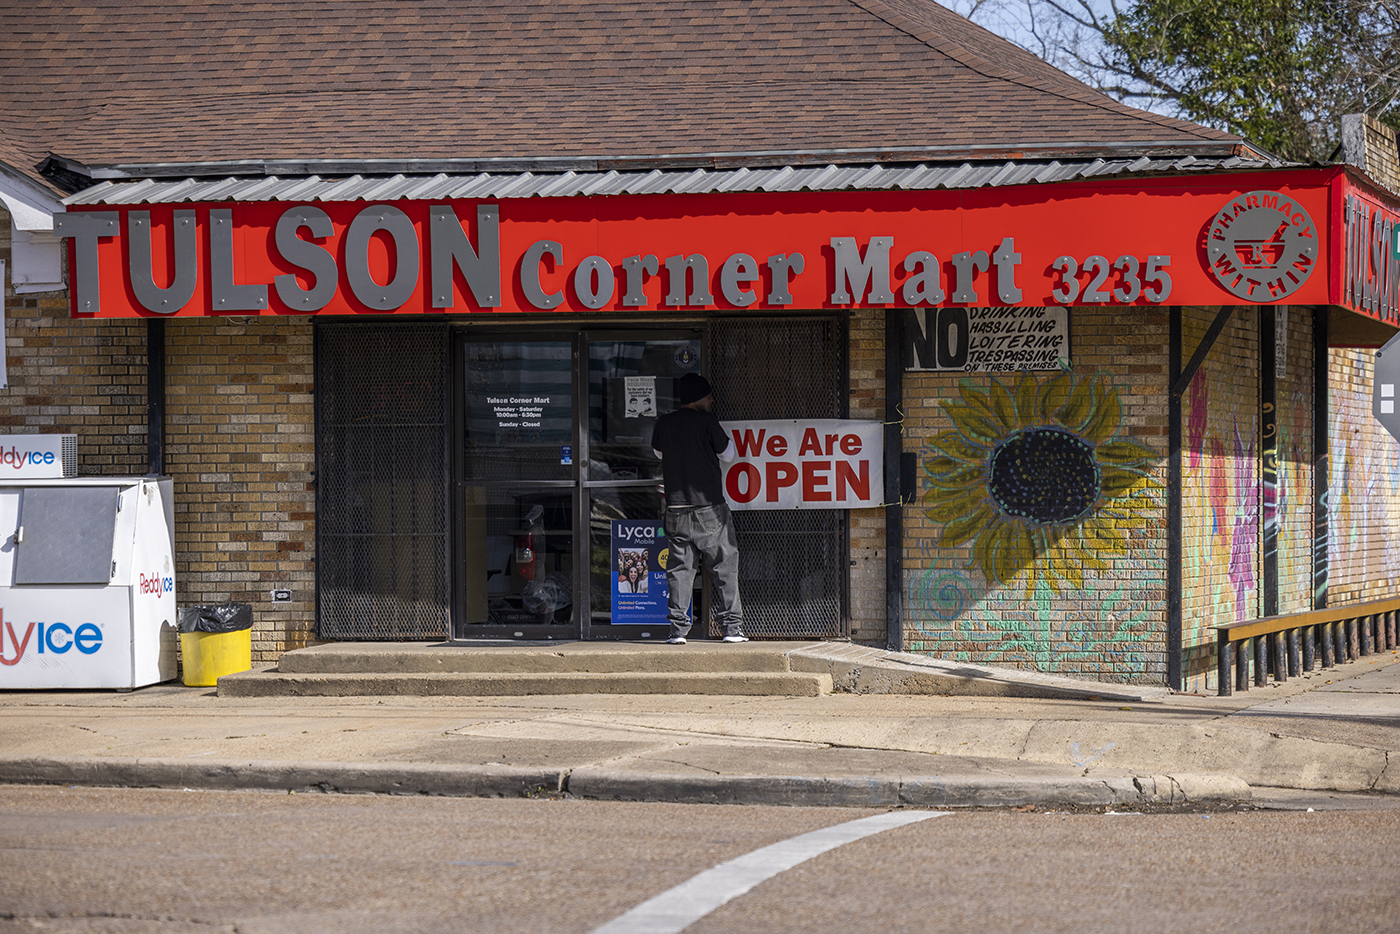 Tulson Corner Mart in Houston's Third Ward, a food desert for many local residents.